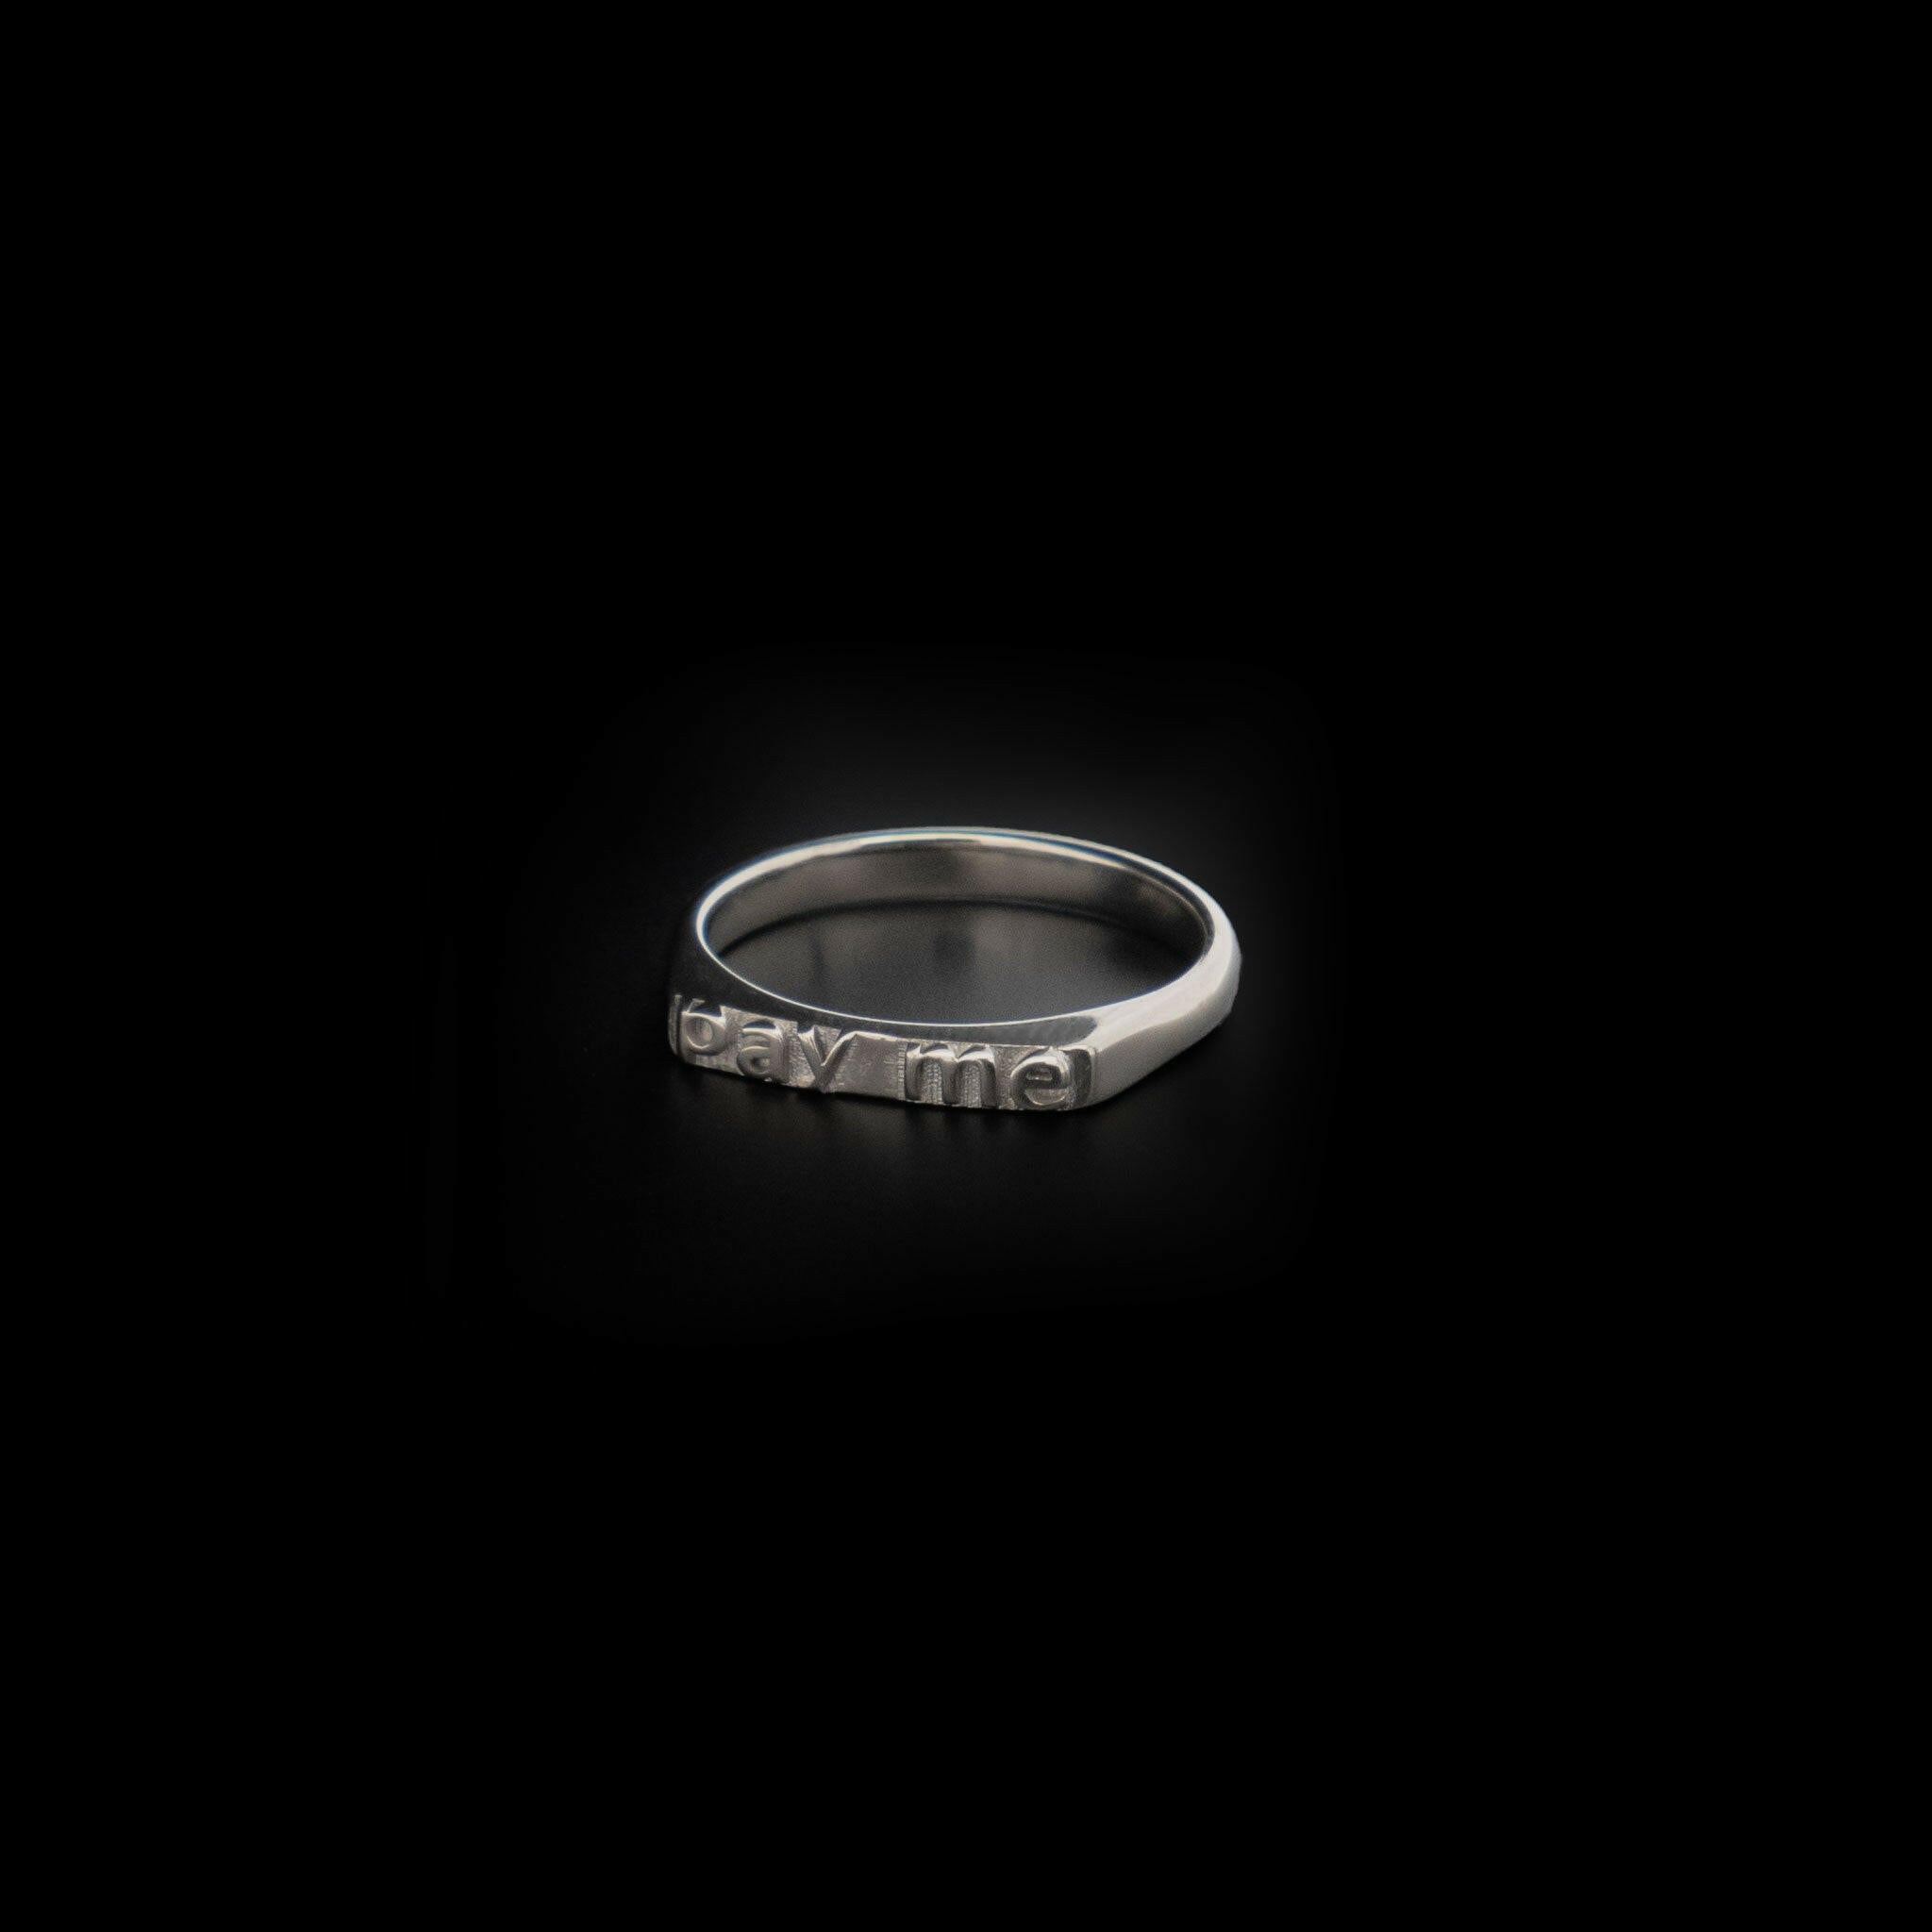 slightly right angled ring with texts that reads "pay me"